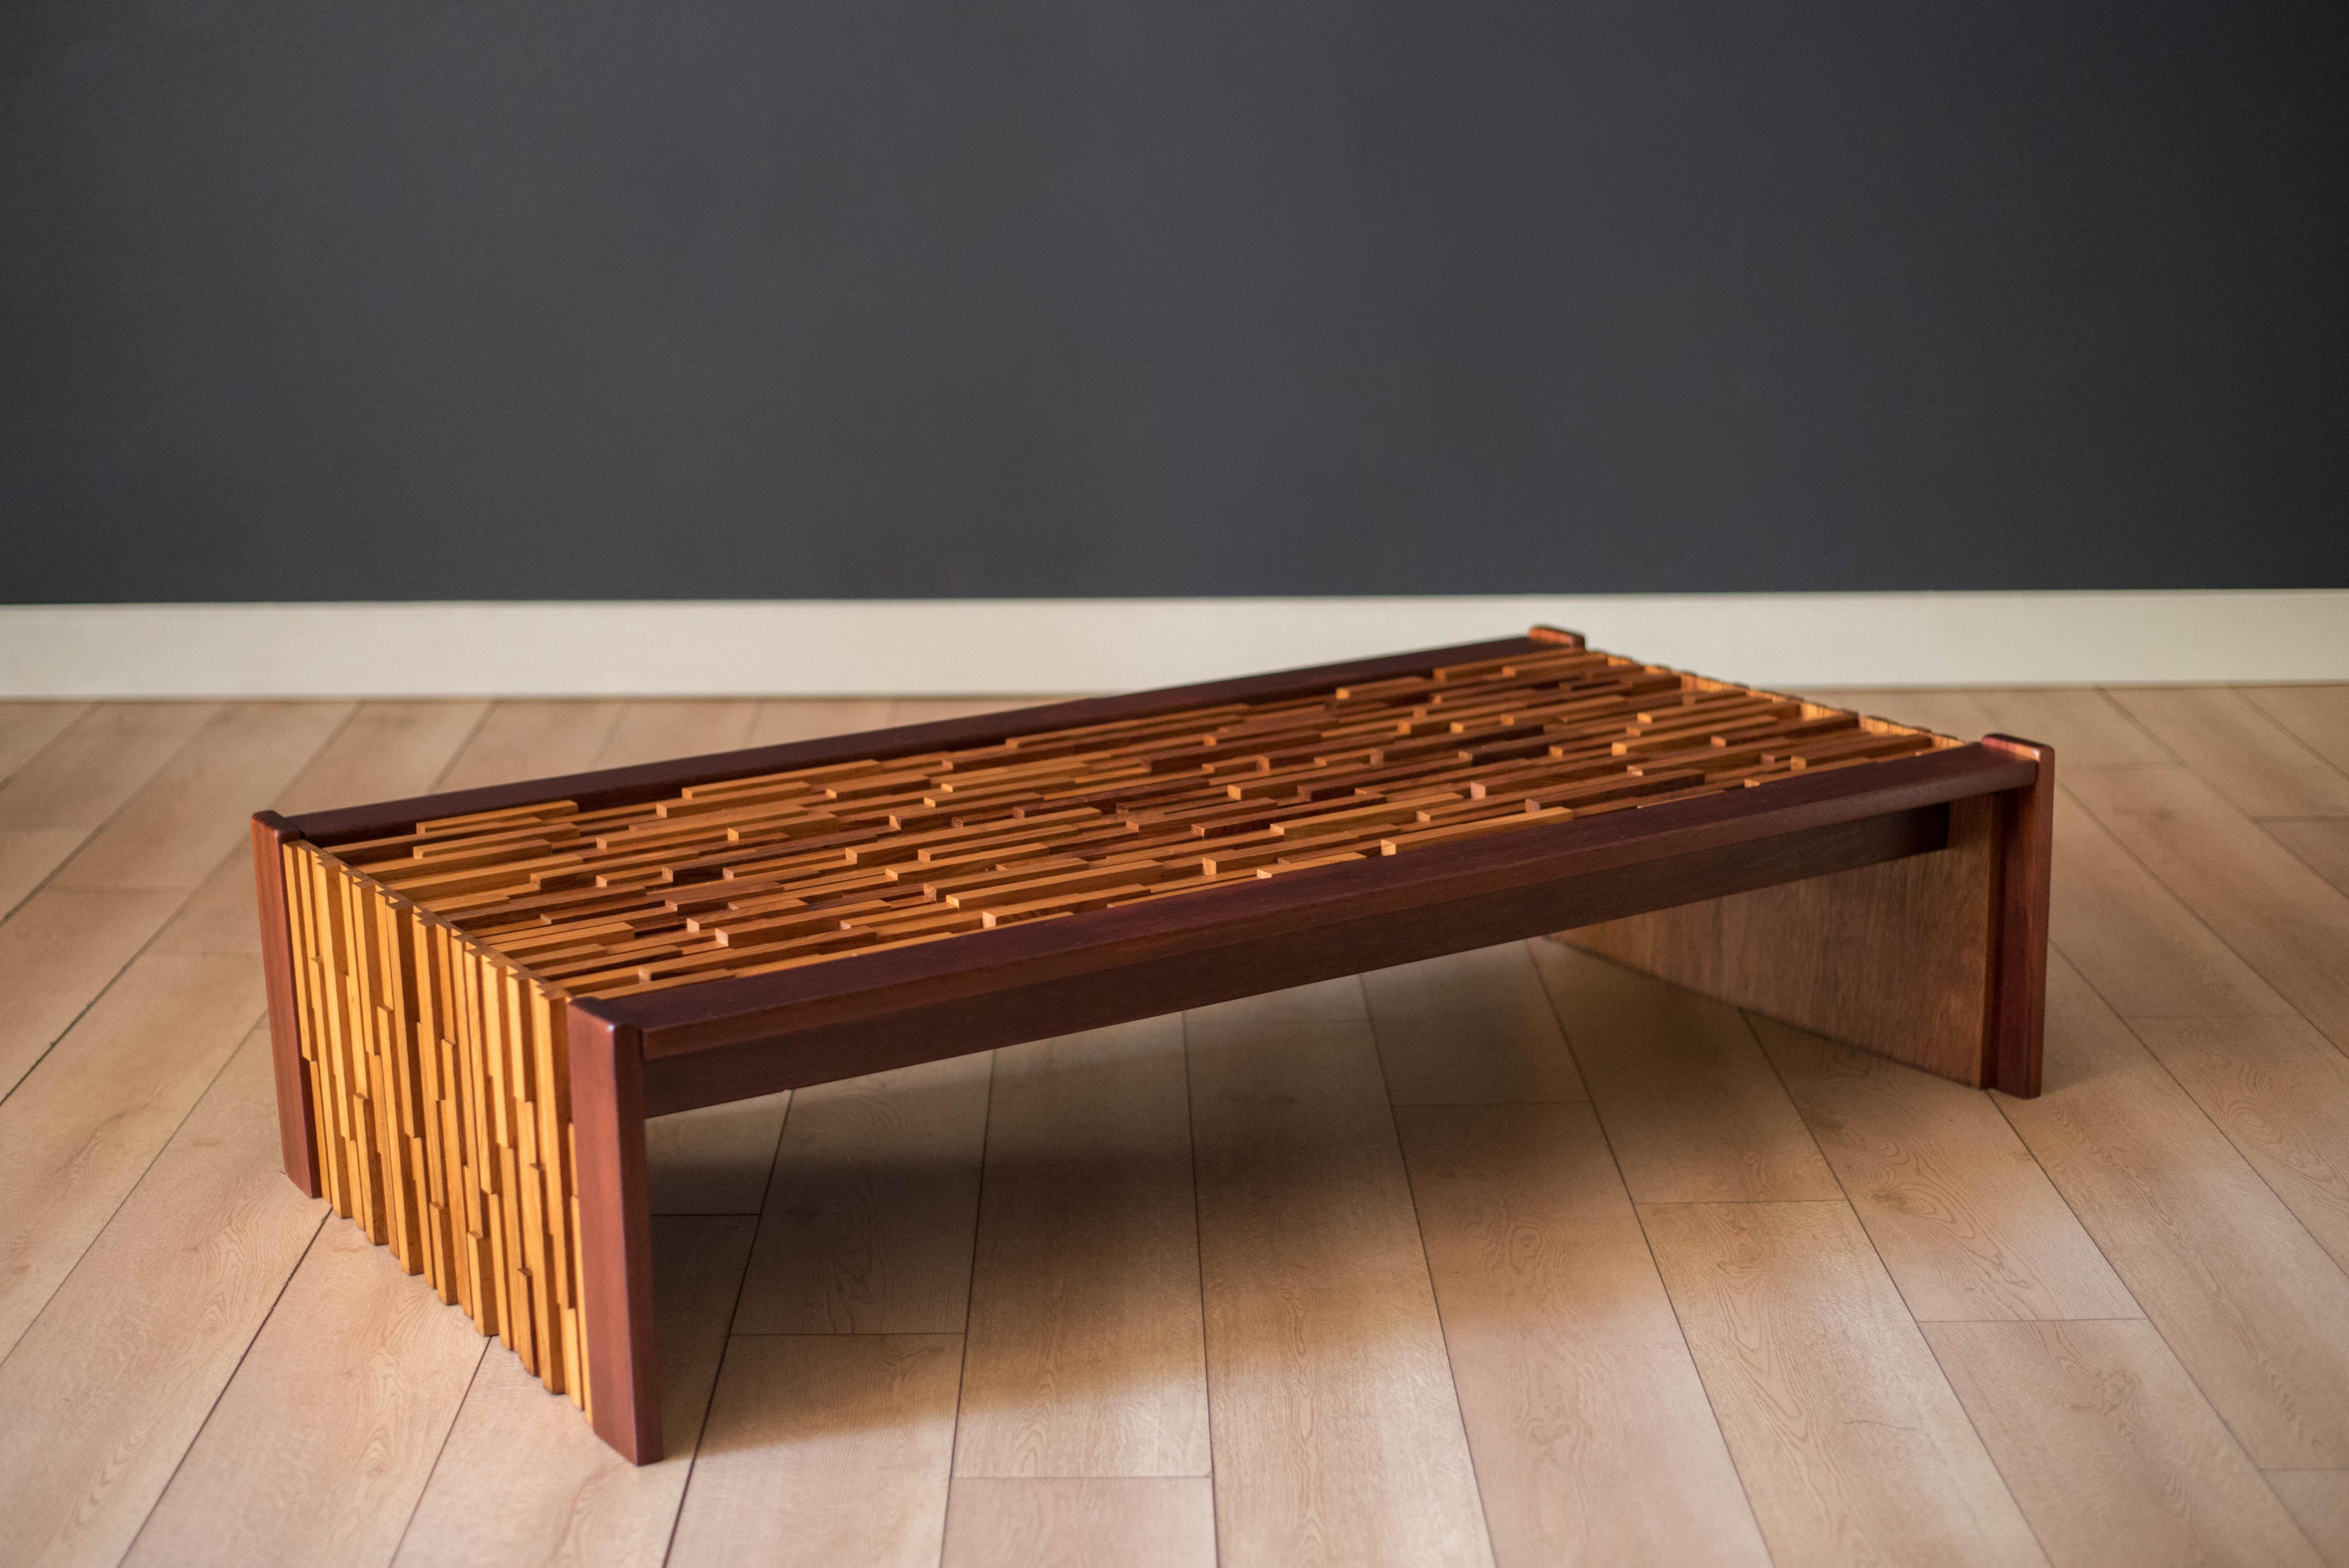 Vintage coffee table designed by Percival Lafer circa 1970's. Features a continuous mixed wood pattern of rosewood, mahogany, jacaranda, and teak with offset varying levels that is sure to make a statement in any space. Includes a protective glass